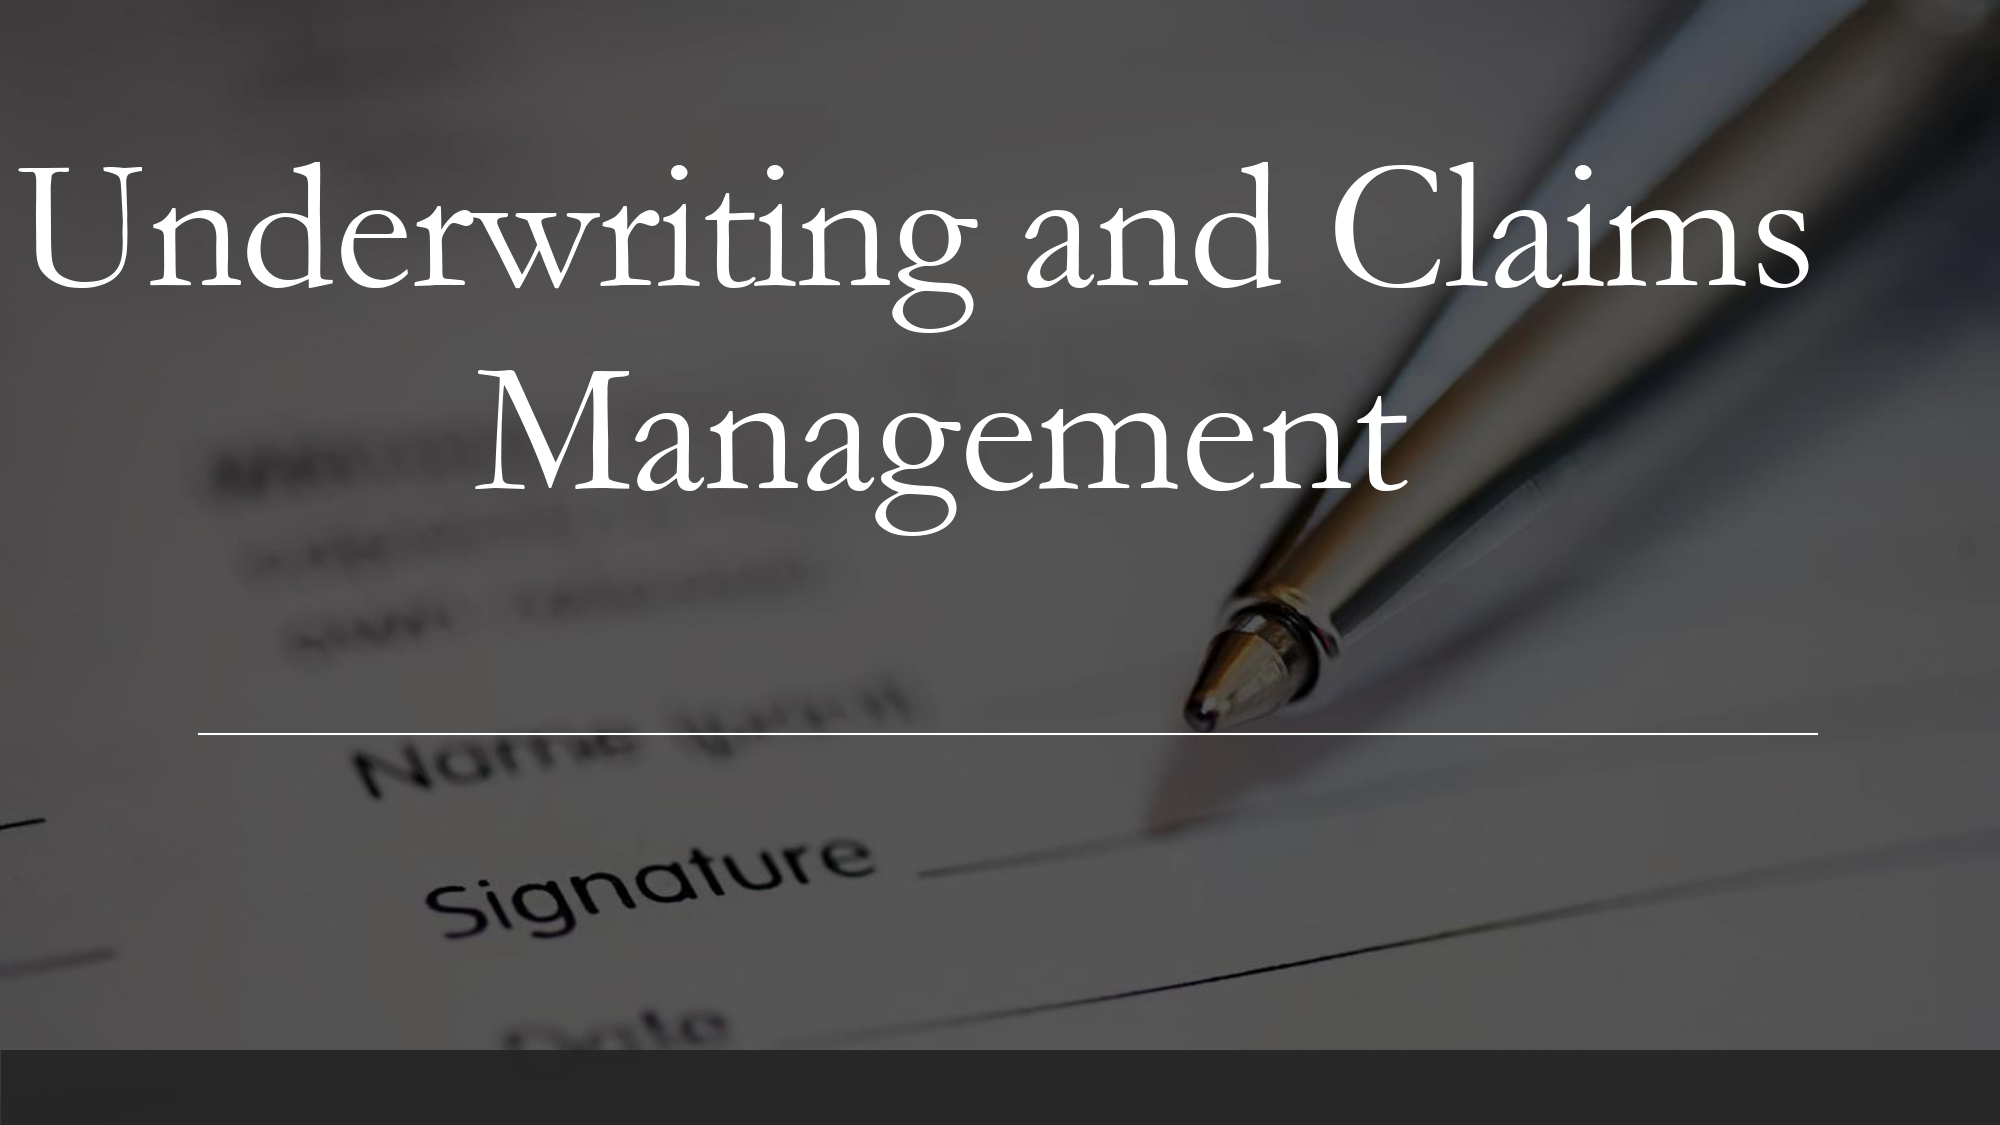 Underwriting and Claims management